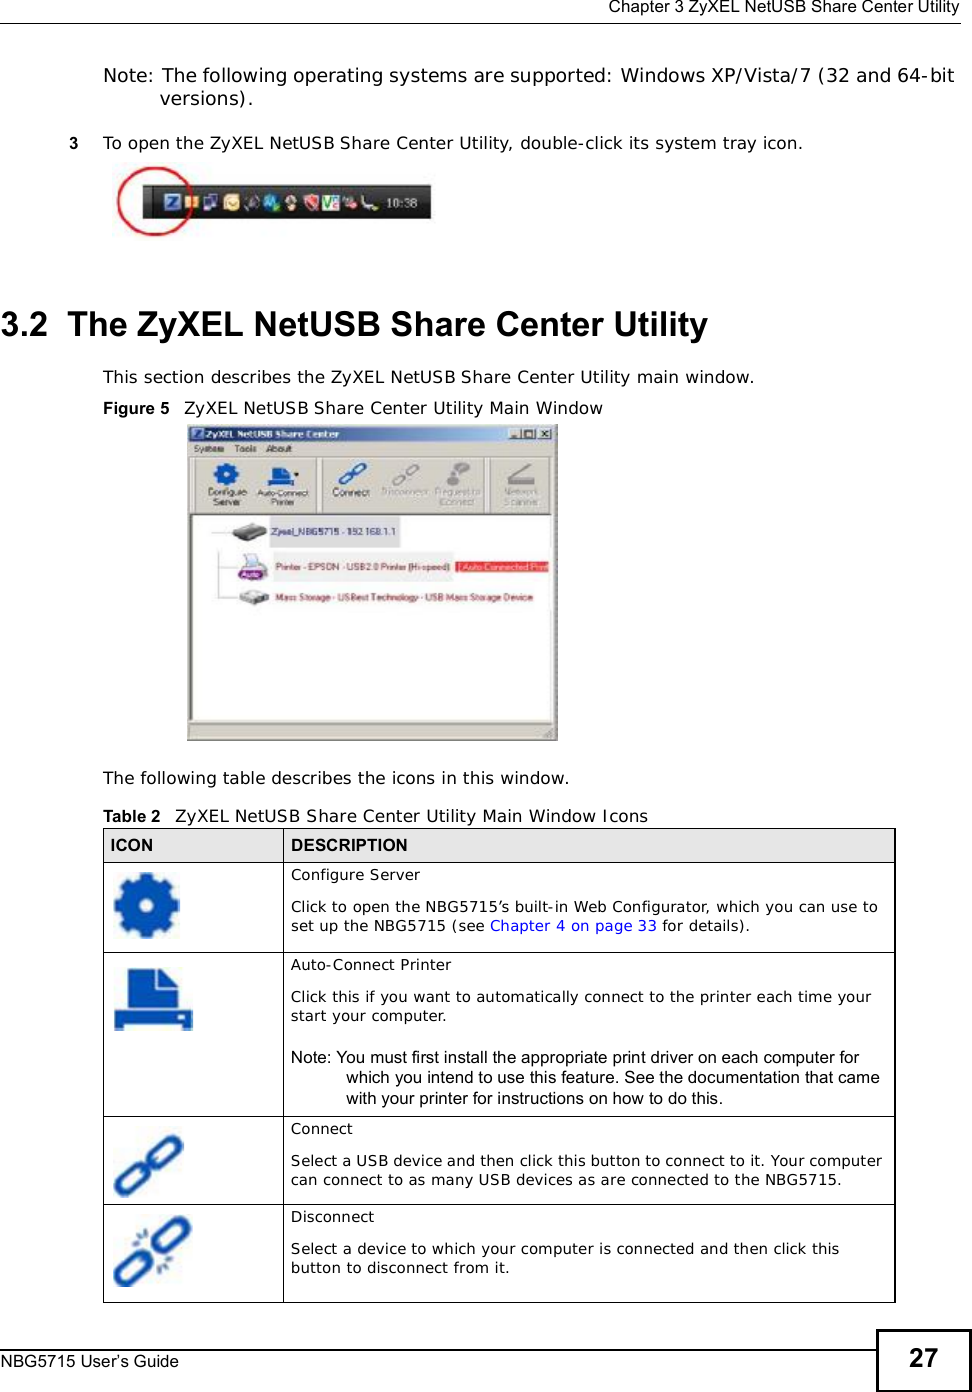  Chapter 3ZyXEL NetUSB Share Center UtilityNBG5715 User’s Guide 27Note: The following operating systems are supported: Windows XP/Vista/7 (32 and 64-bit versions).3To open the ZyXEL NetUSBShare Center Utility, double-click its system tray icon.3.2  The ZyXEL NetUSB Share Center UtilityThis section describes the ZyXEL NetUSBShare Center Utility main window.Figure 5   ZyXEL NetUSBShare Center Utility Main WindowThe following table describes the icons in this window.Table 2   ZyXEL NetUSB Share Center Utility Main Window IconsICON DESCRIPTIONConfigure ServerClick to open the NBG5715’s built-in Web Configurator, which you can use to set up the NBG5715 (see Chapter 4 on page 33 for details).Auto-Connect PrinterClick this if you want to automatically connect to the printer each time your start your computer.Note: You must first install the appropriate print driver on each computer for which you intend to use this feature. See the documentation that came with your printer for instructions on how to do this.ConnectSelect a USB device and then click this button to connect to it. Your computer can connect to as many USB devices as are connected to the NBG5715.DisconnectSelect a device to which your computer is connected and then click this button to disconnect from it.